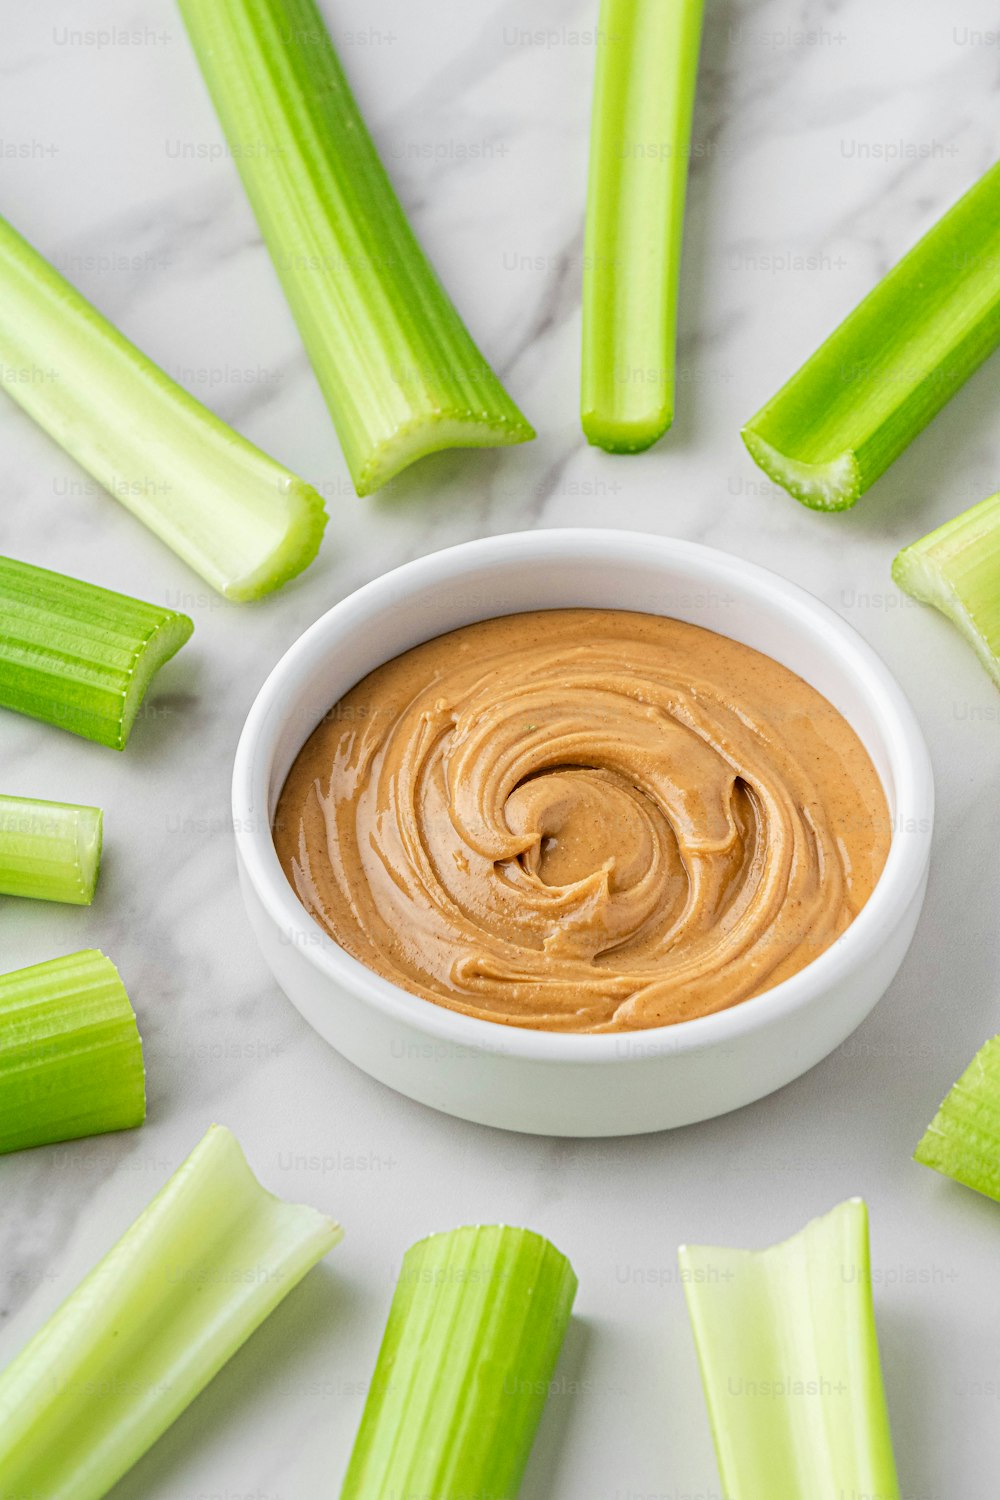 celery sticks and dip in a white bowl